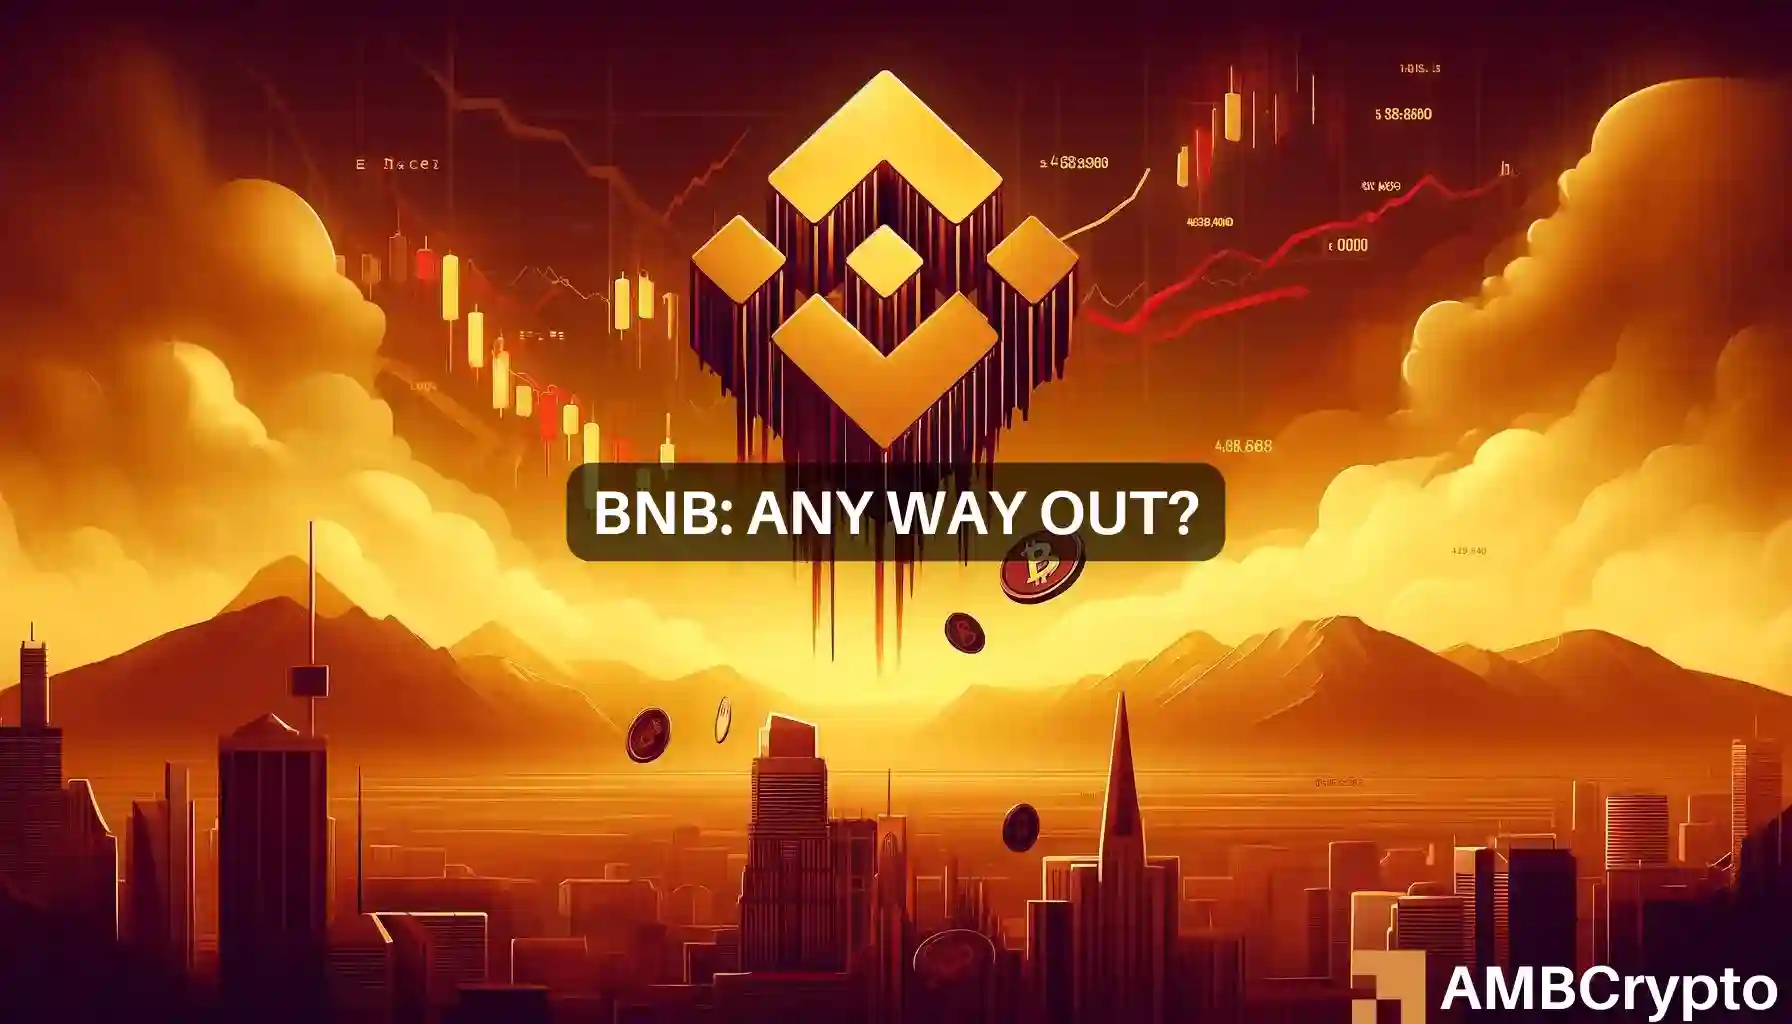 BNB Chain’s revenue takes a hit: Examining the root cause